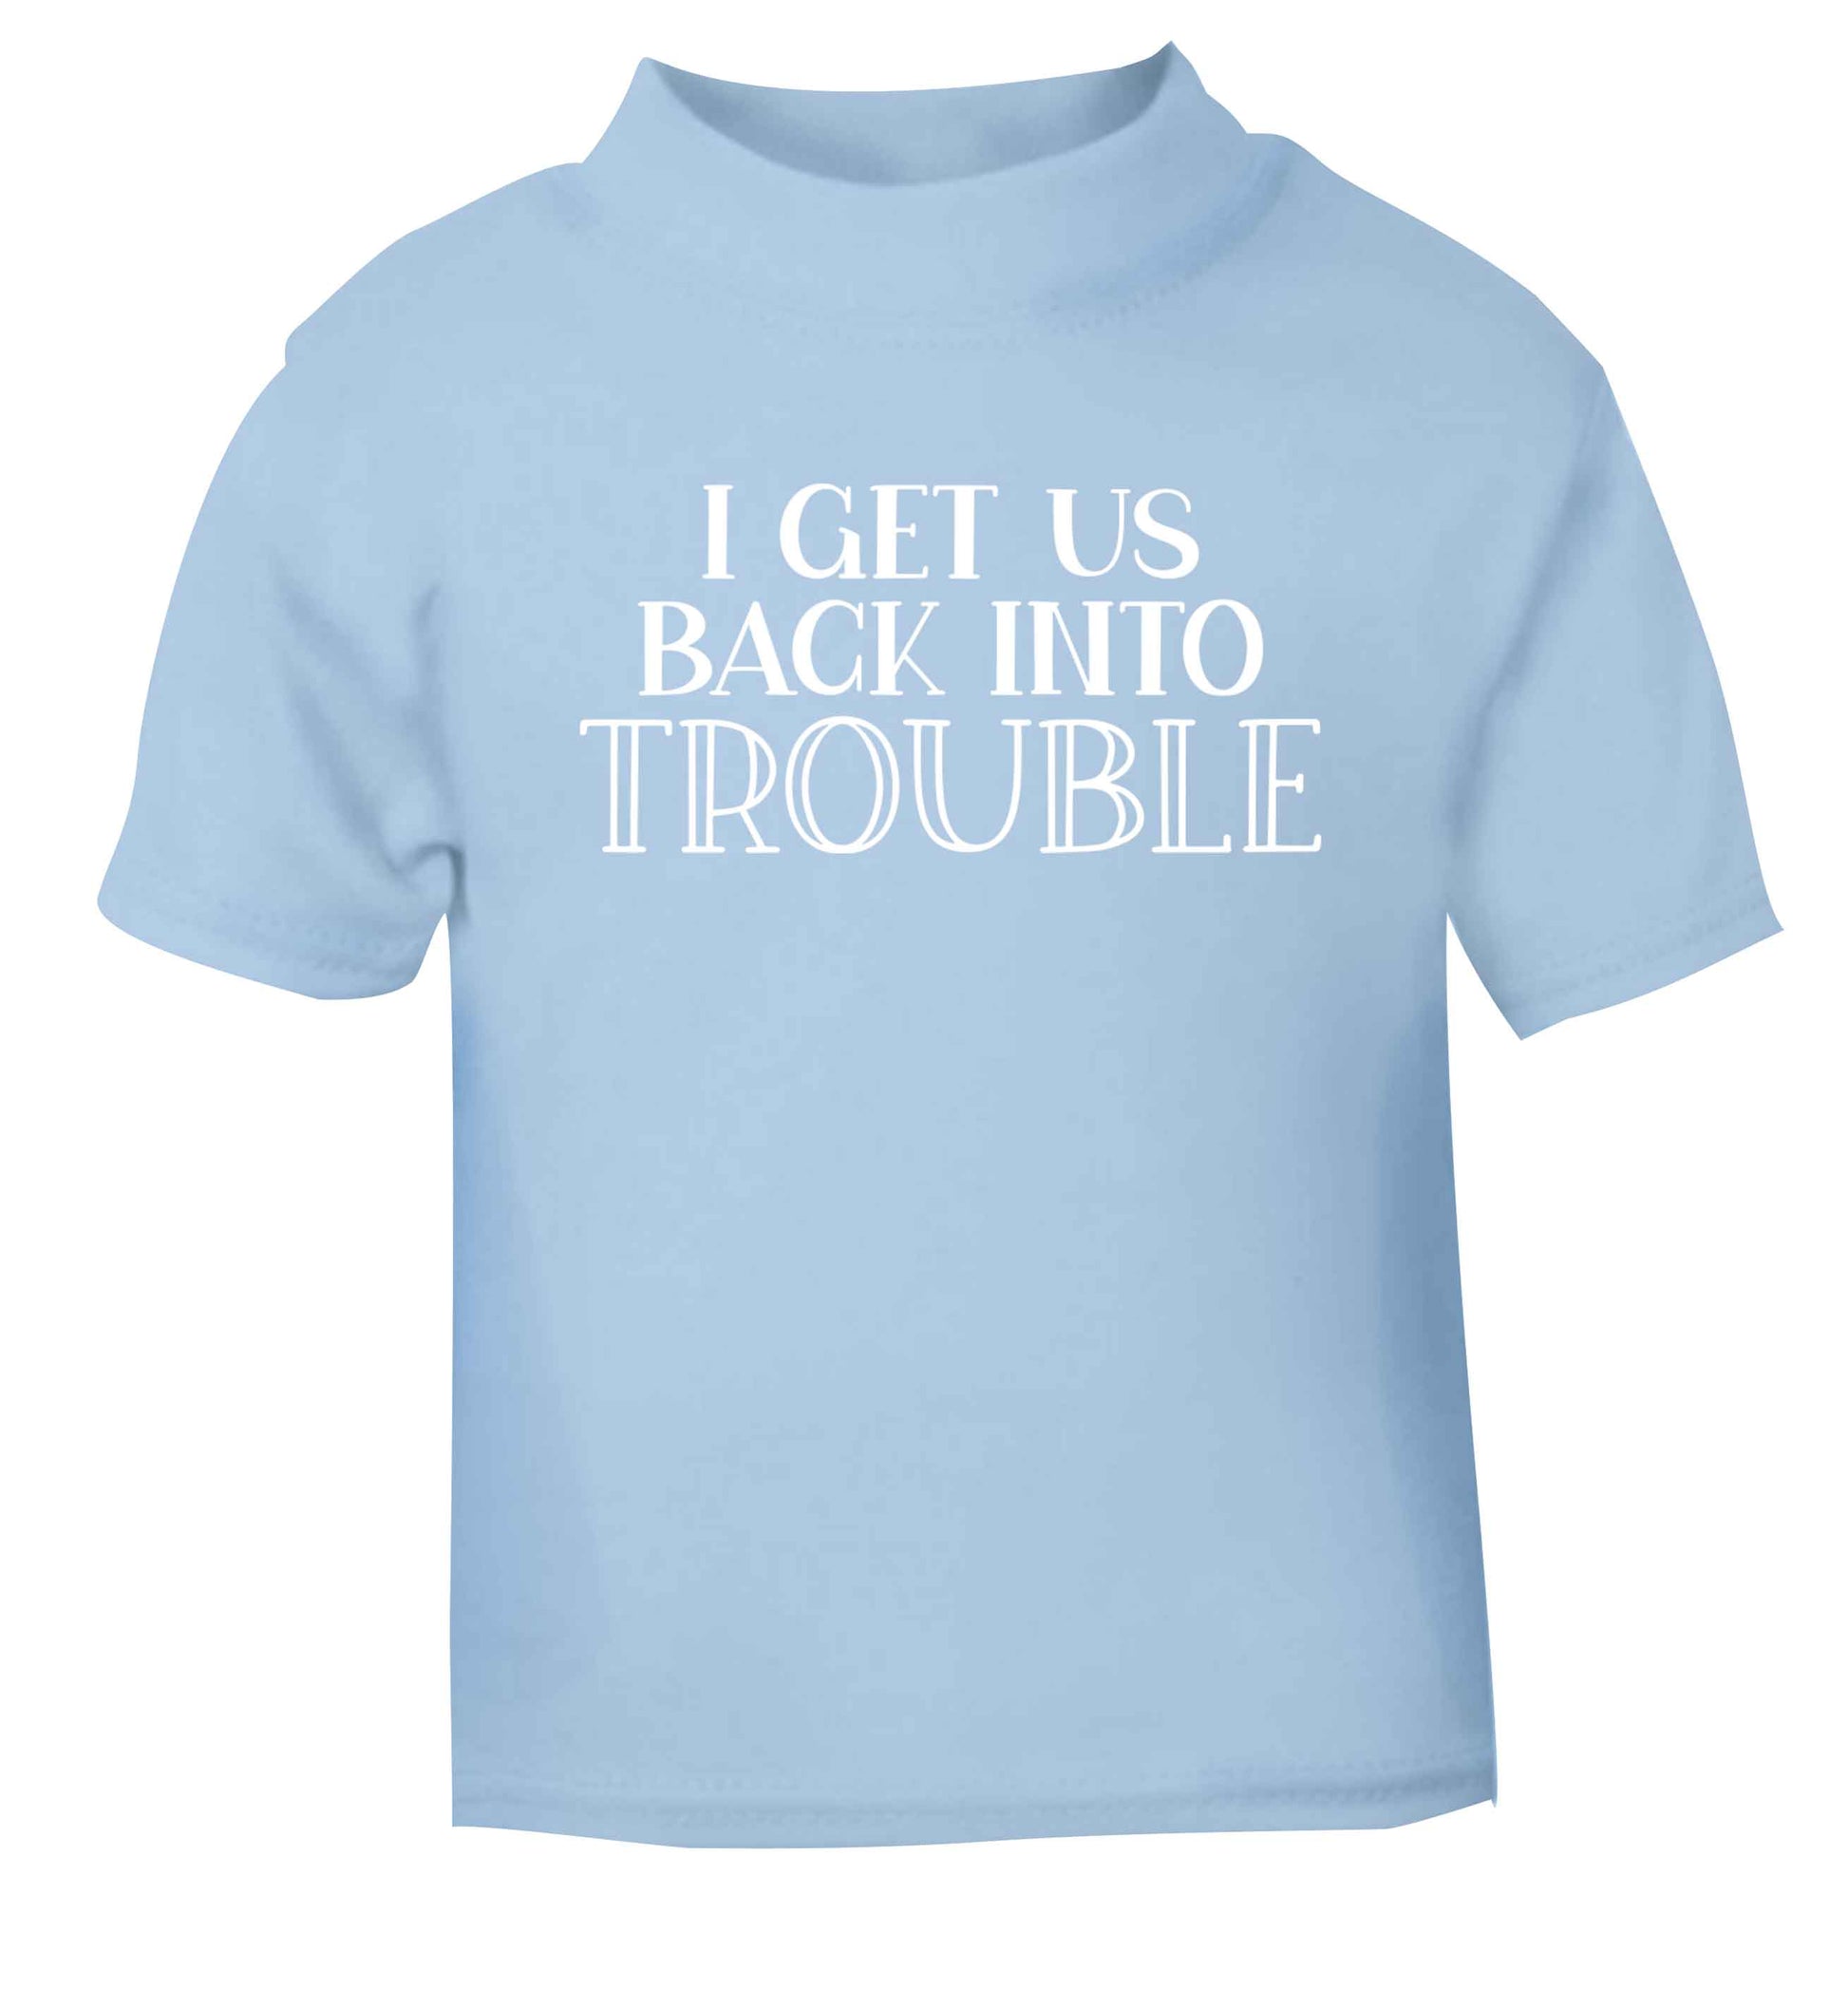 I get us back into trouble light blue baby toddler Tshirt 2 Years